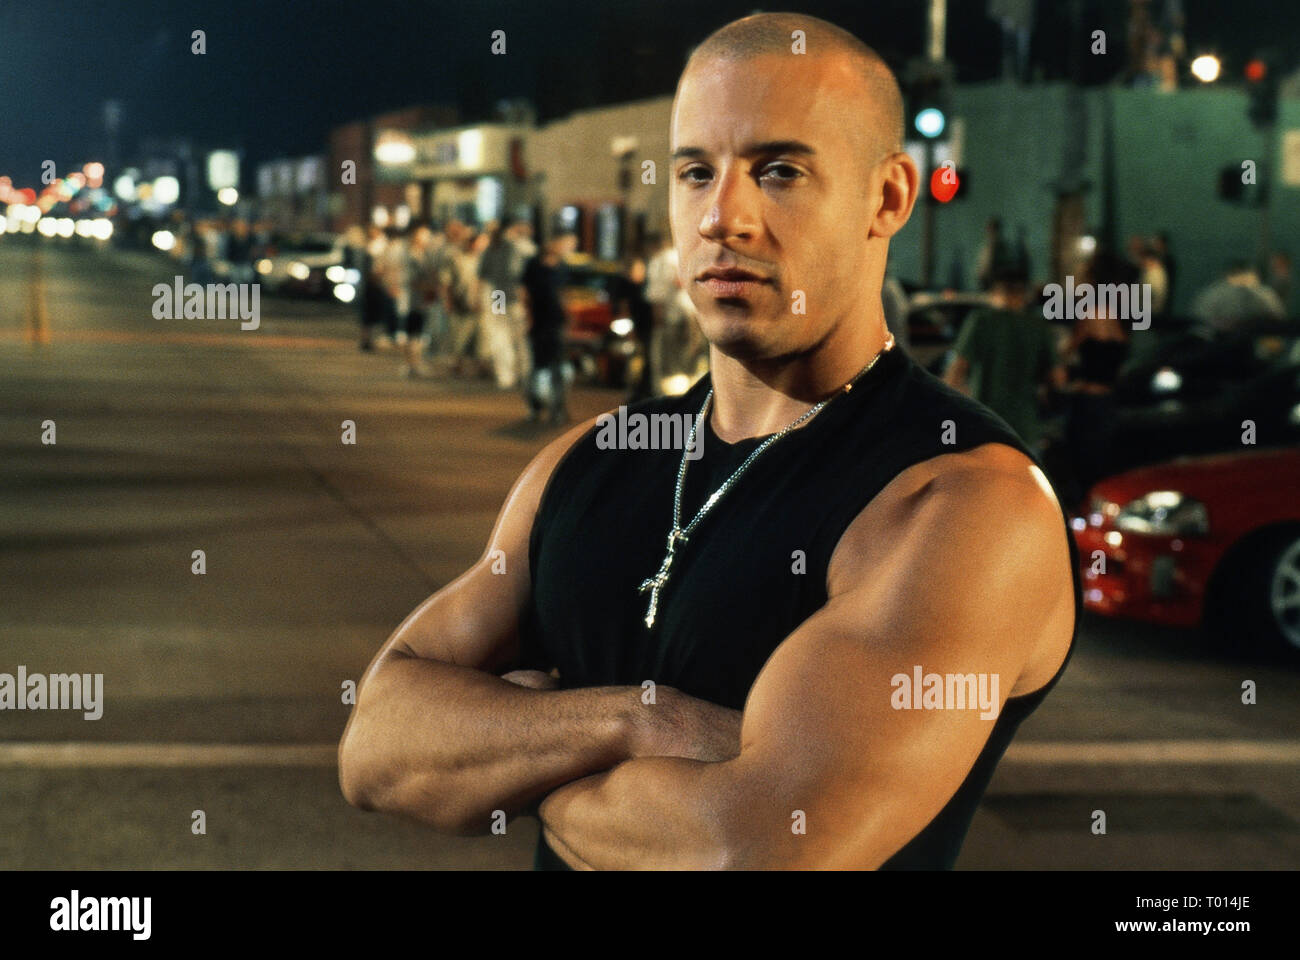 VIN DIESEL, THE FAST AND THE FURIOUS, 2001 Stock Photo - Alamy